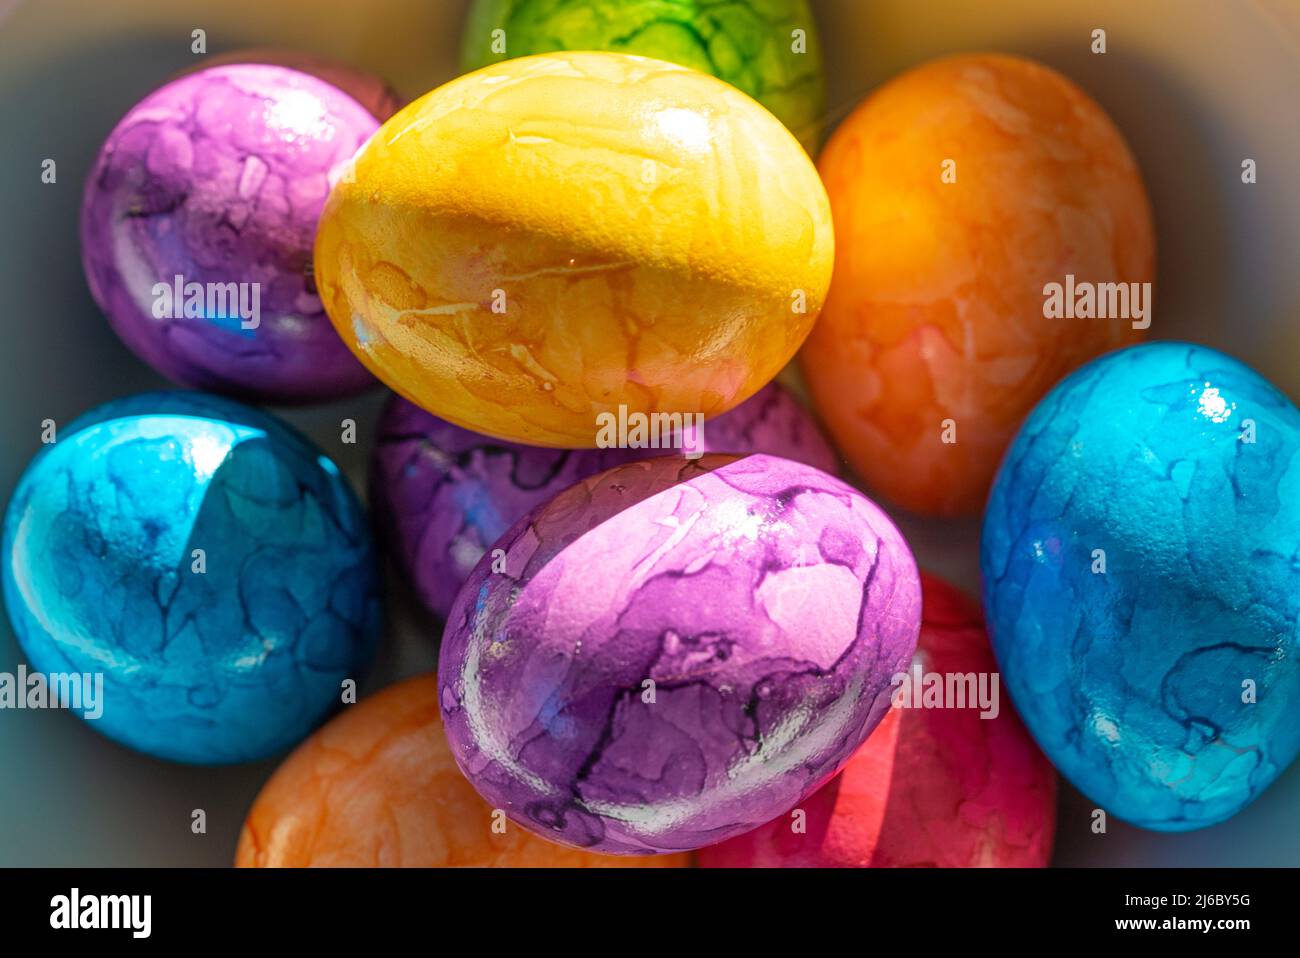 Brightly colored Easer eggs in a bowl Stock Photo